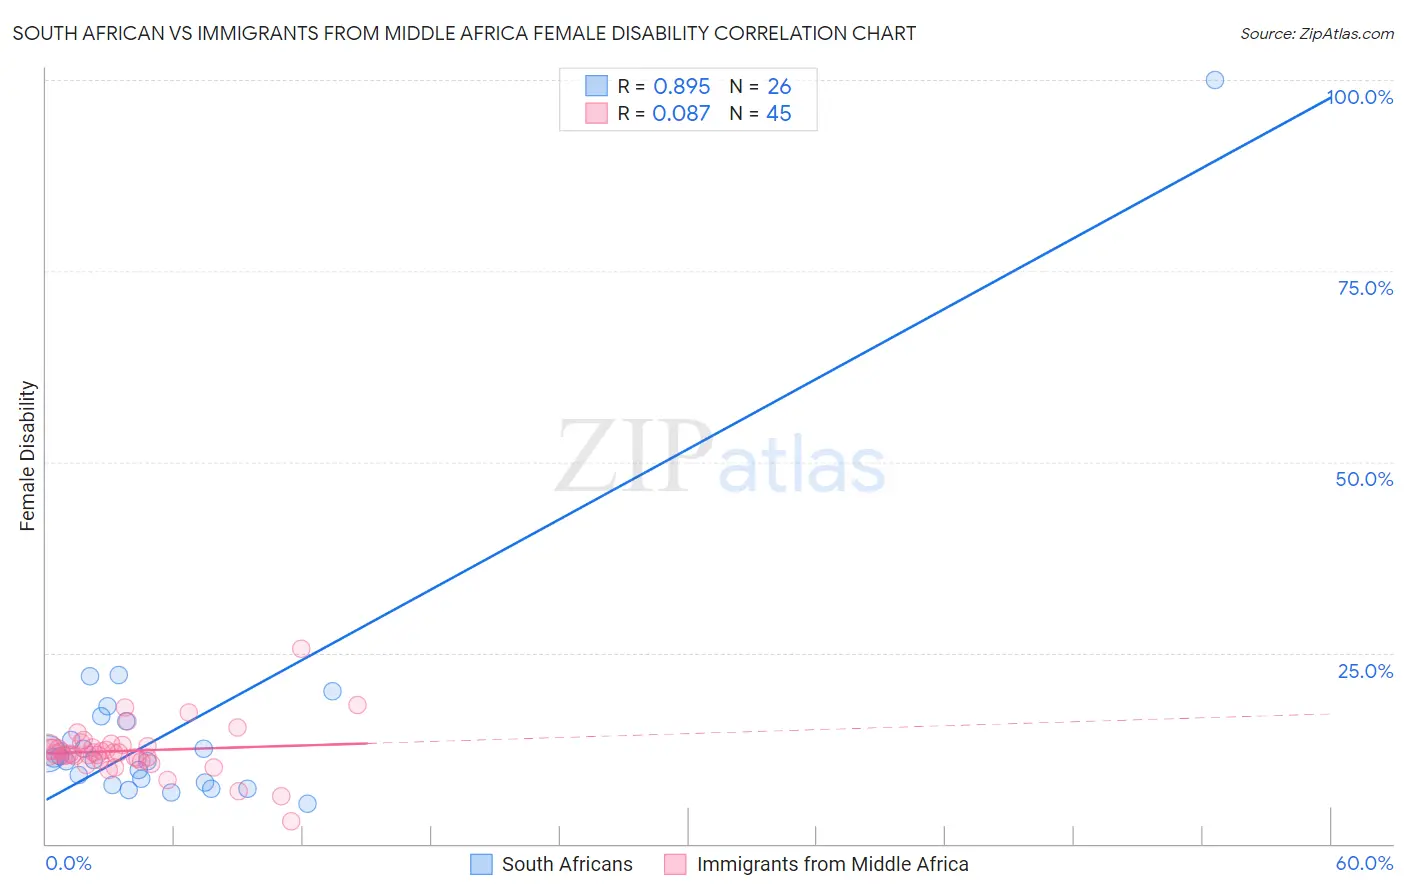 South African vs Immigrants from Middle Africa Female Disability